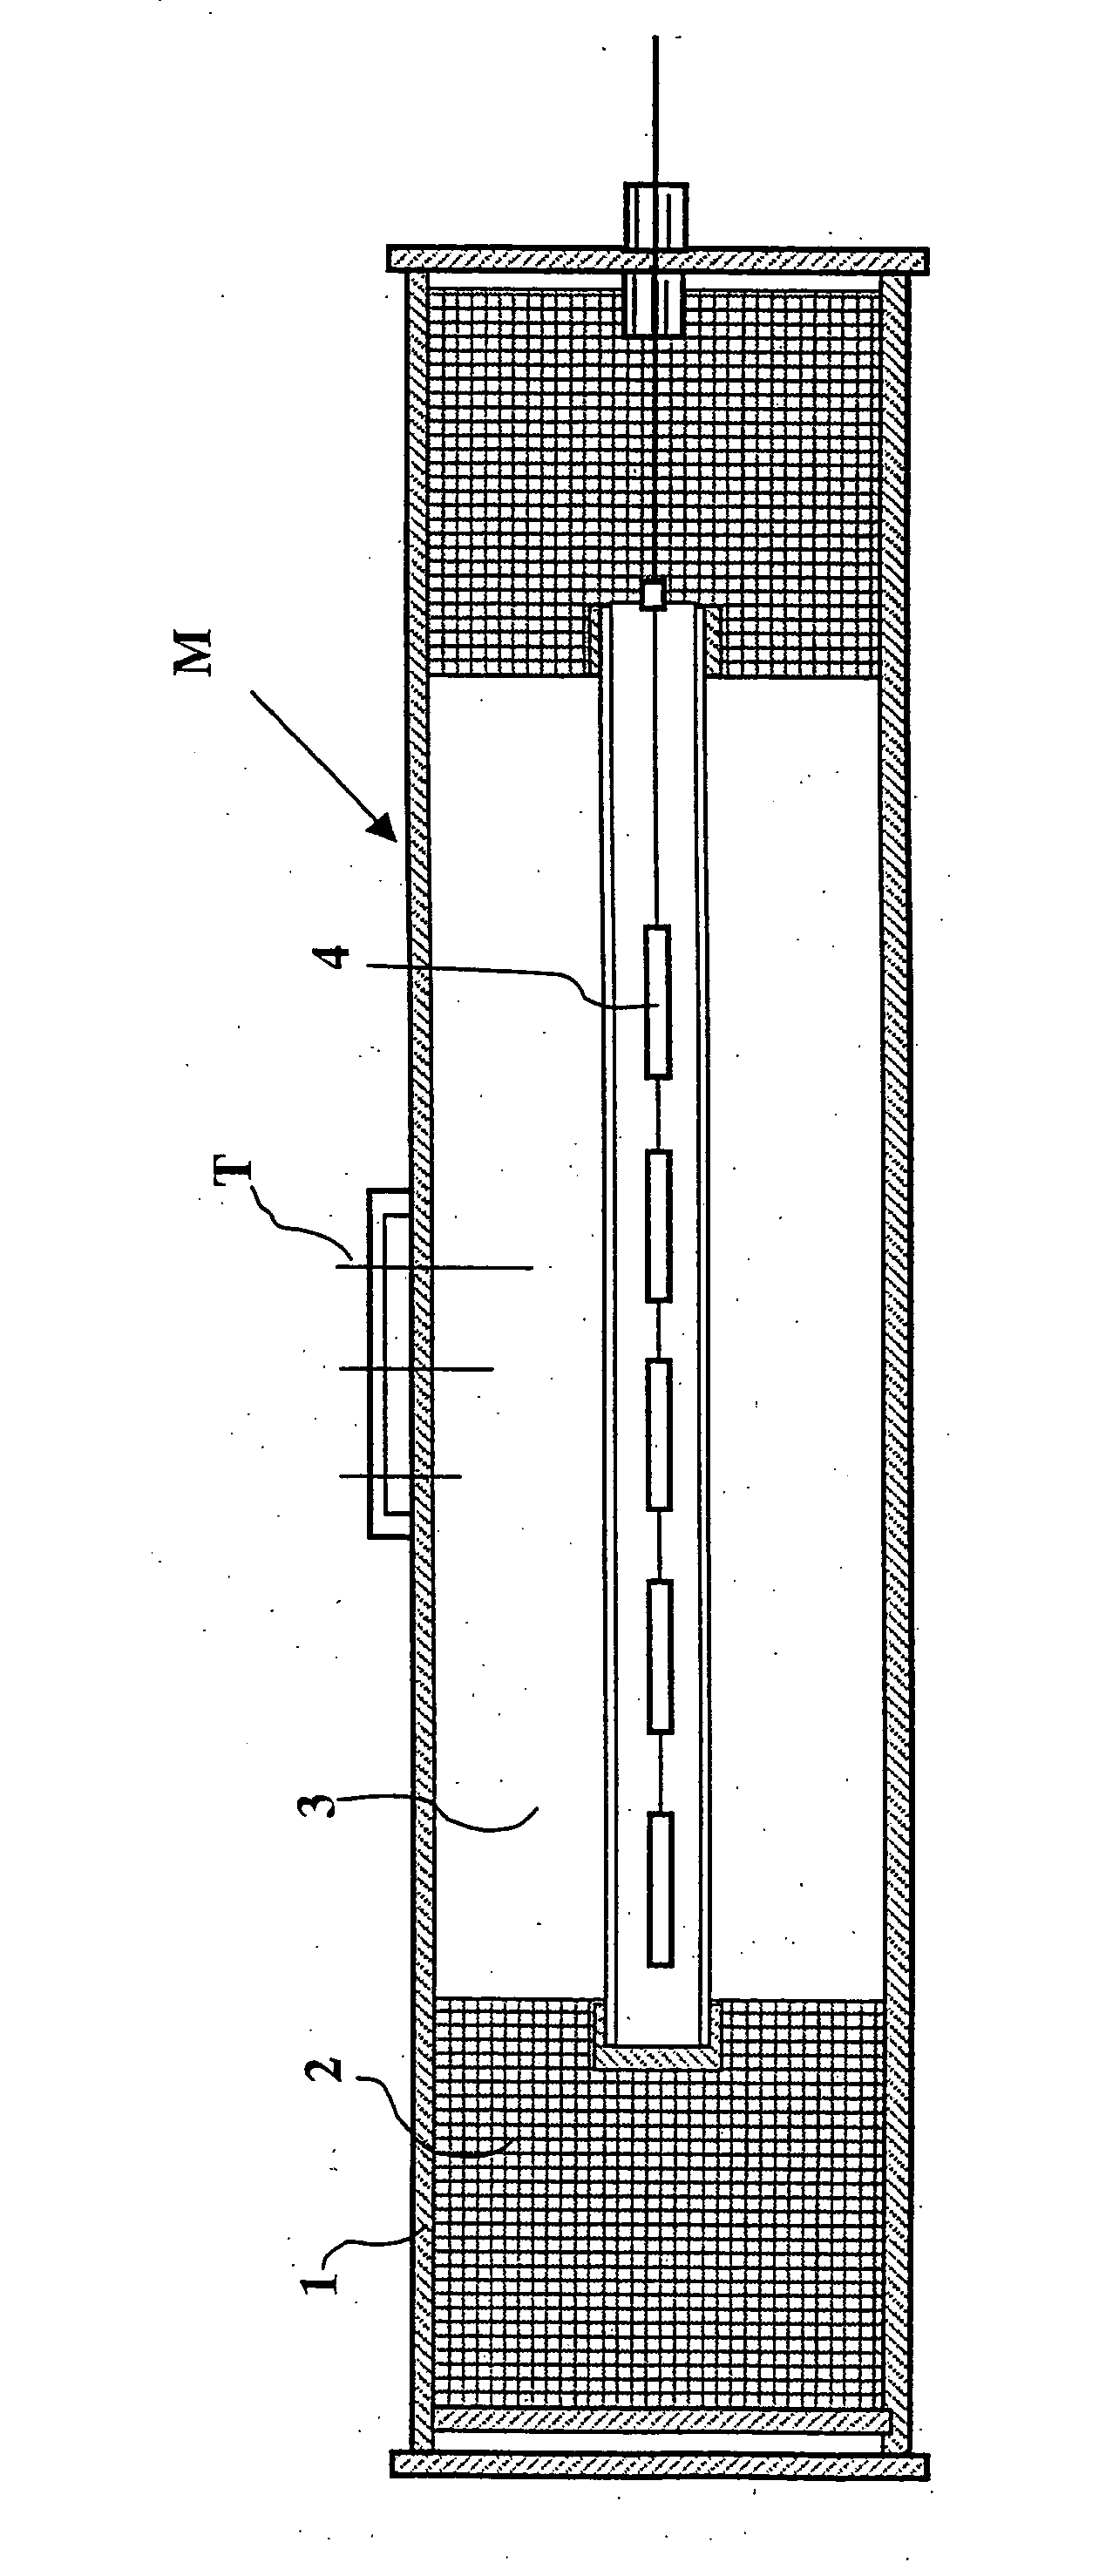 Thermal insulation gel with controlled crosslinking for petroleum hydrocarbon transmission lines